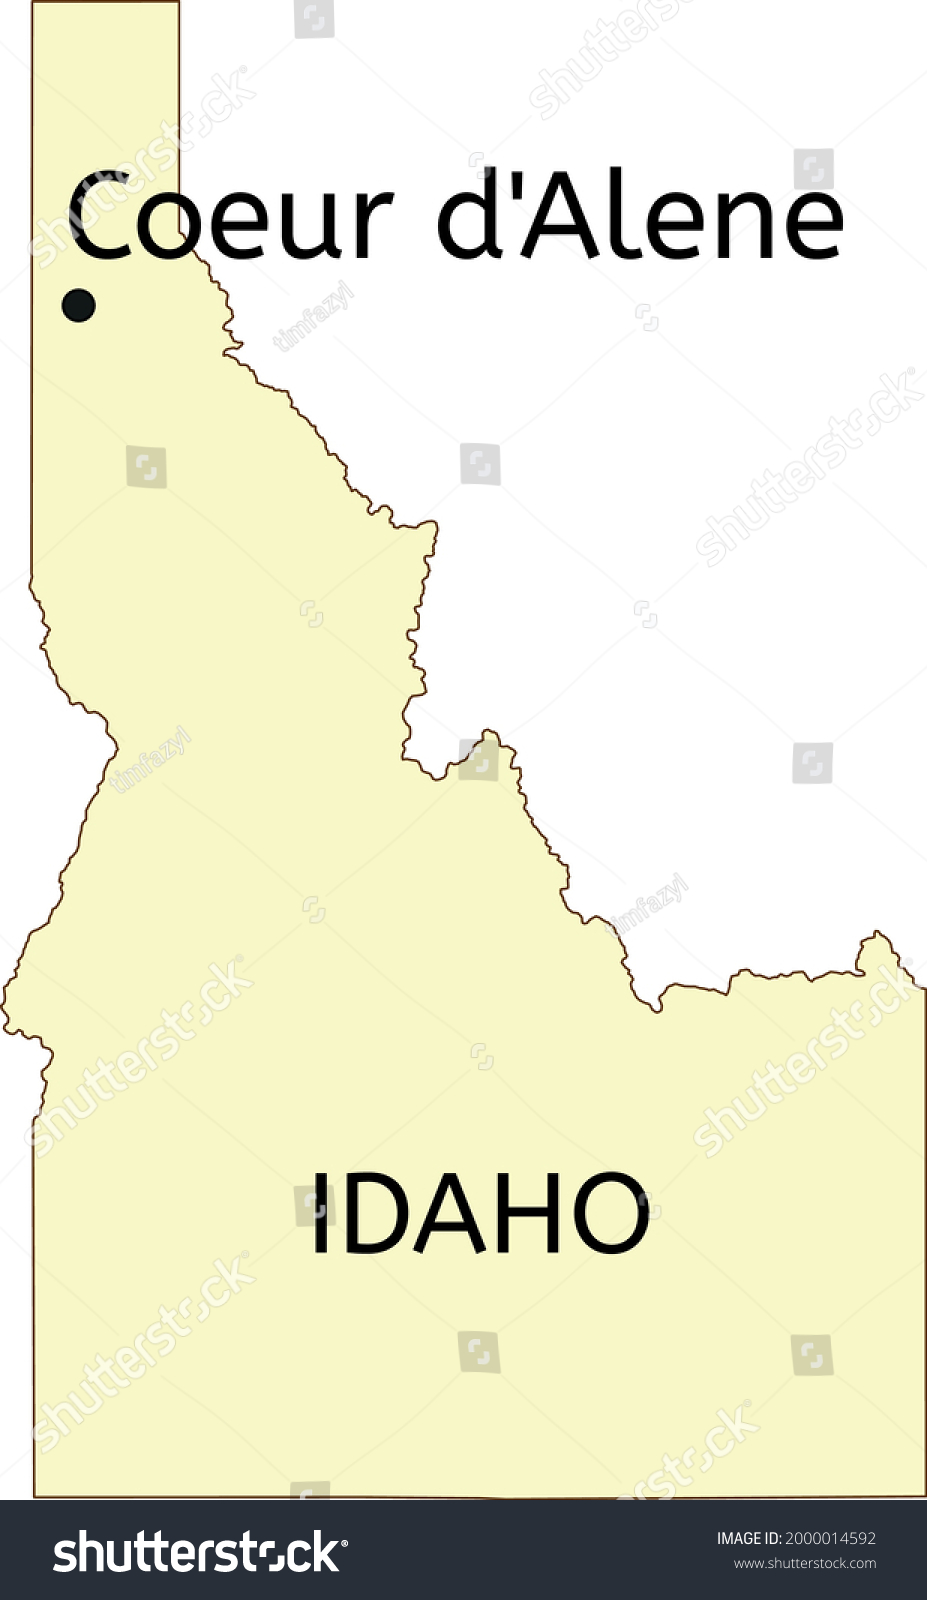 Stock Vector Coeur D Alene City Location On Idaho State Map 2000014592 